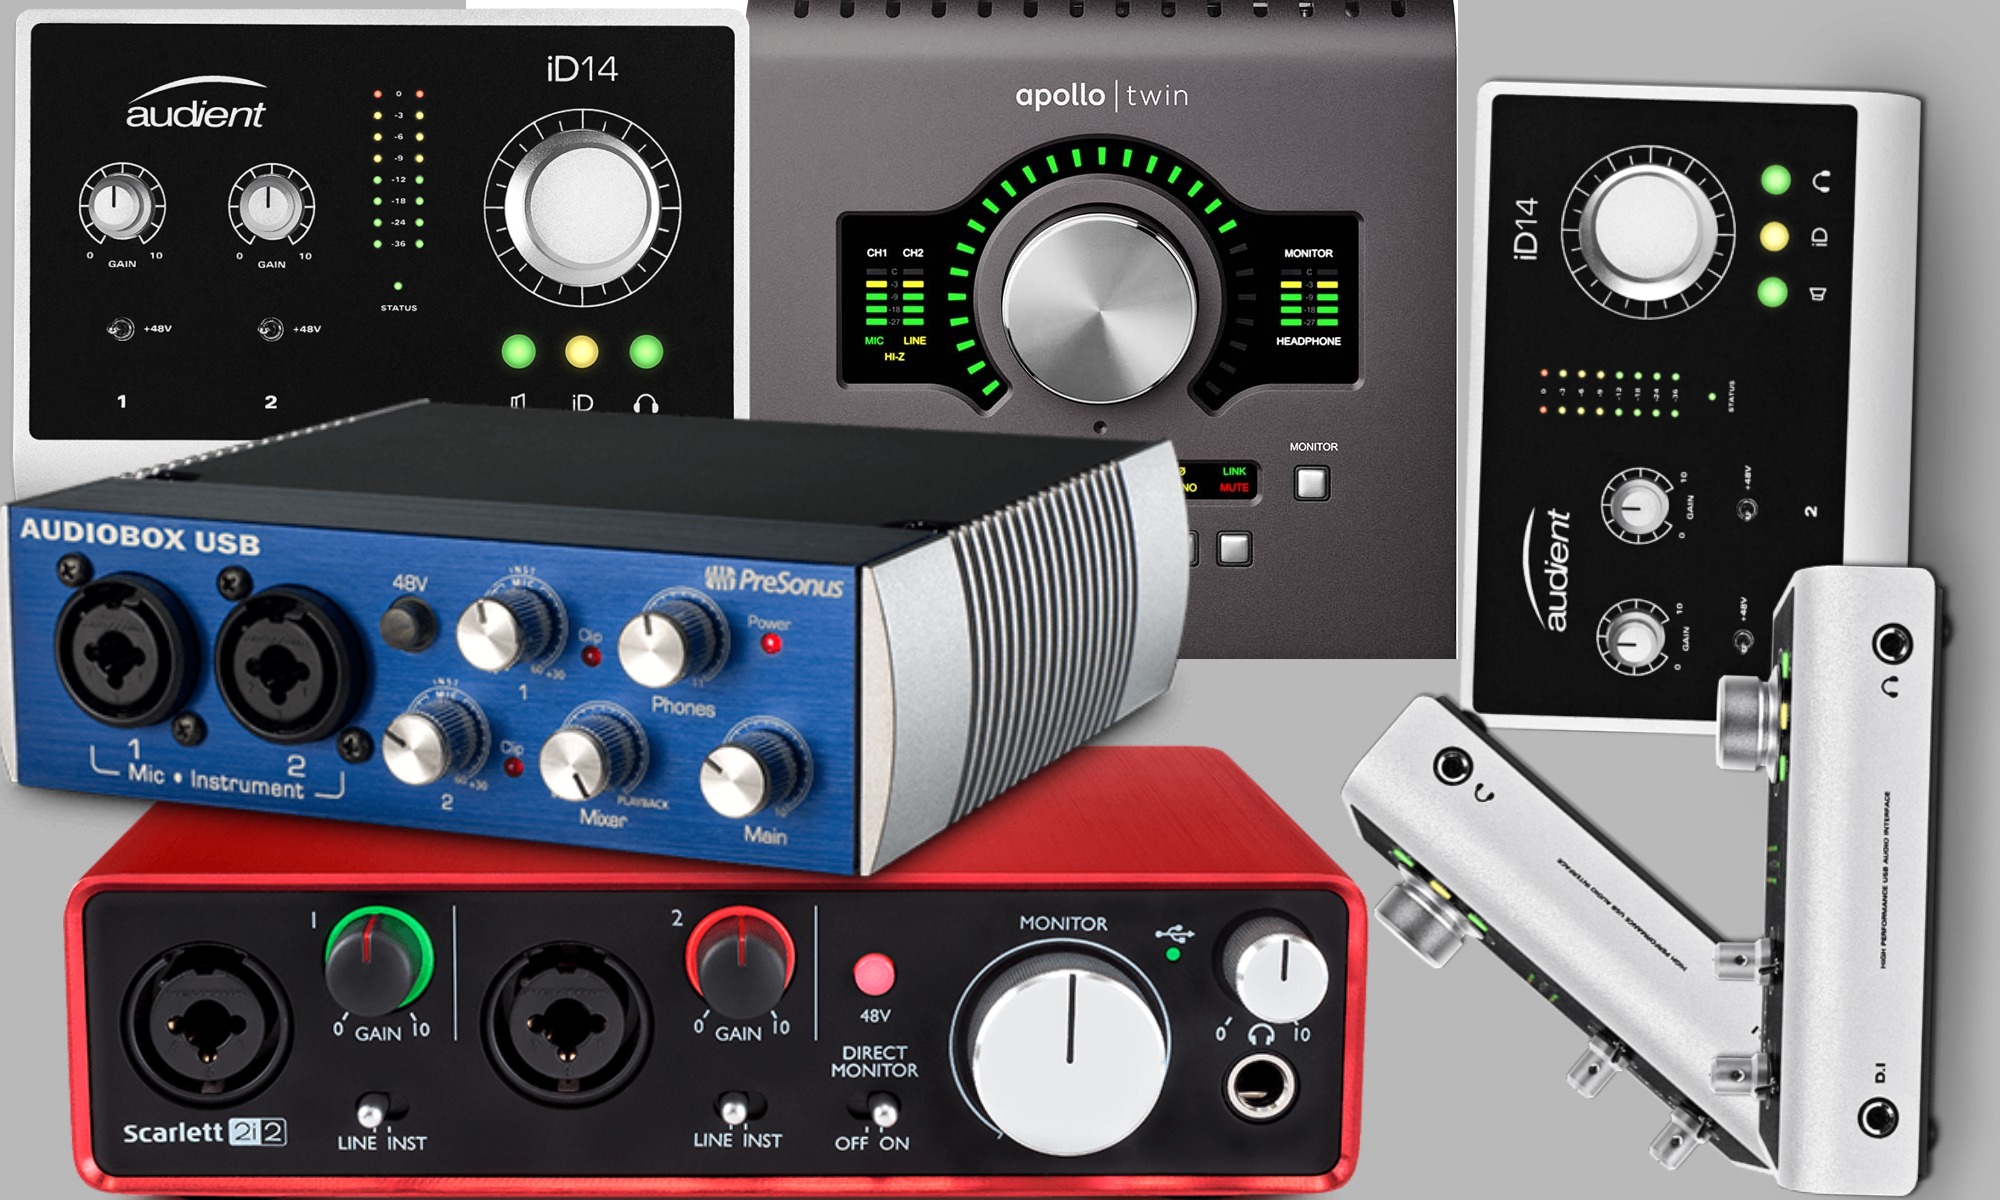 The Best Audio Interface for Fl Studio [Tips, Review & Buyer’s Guide]